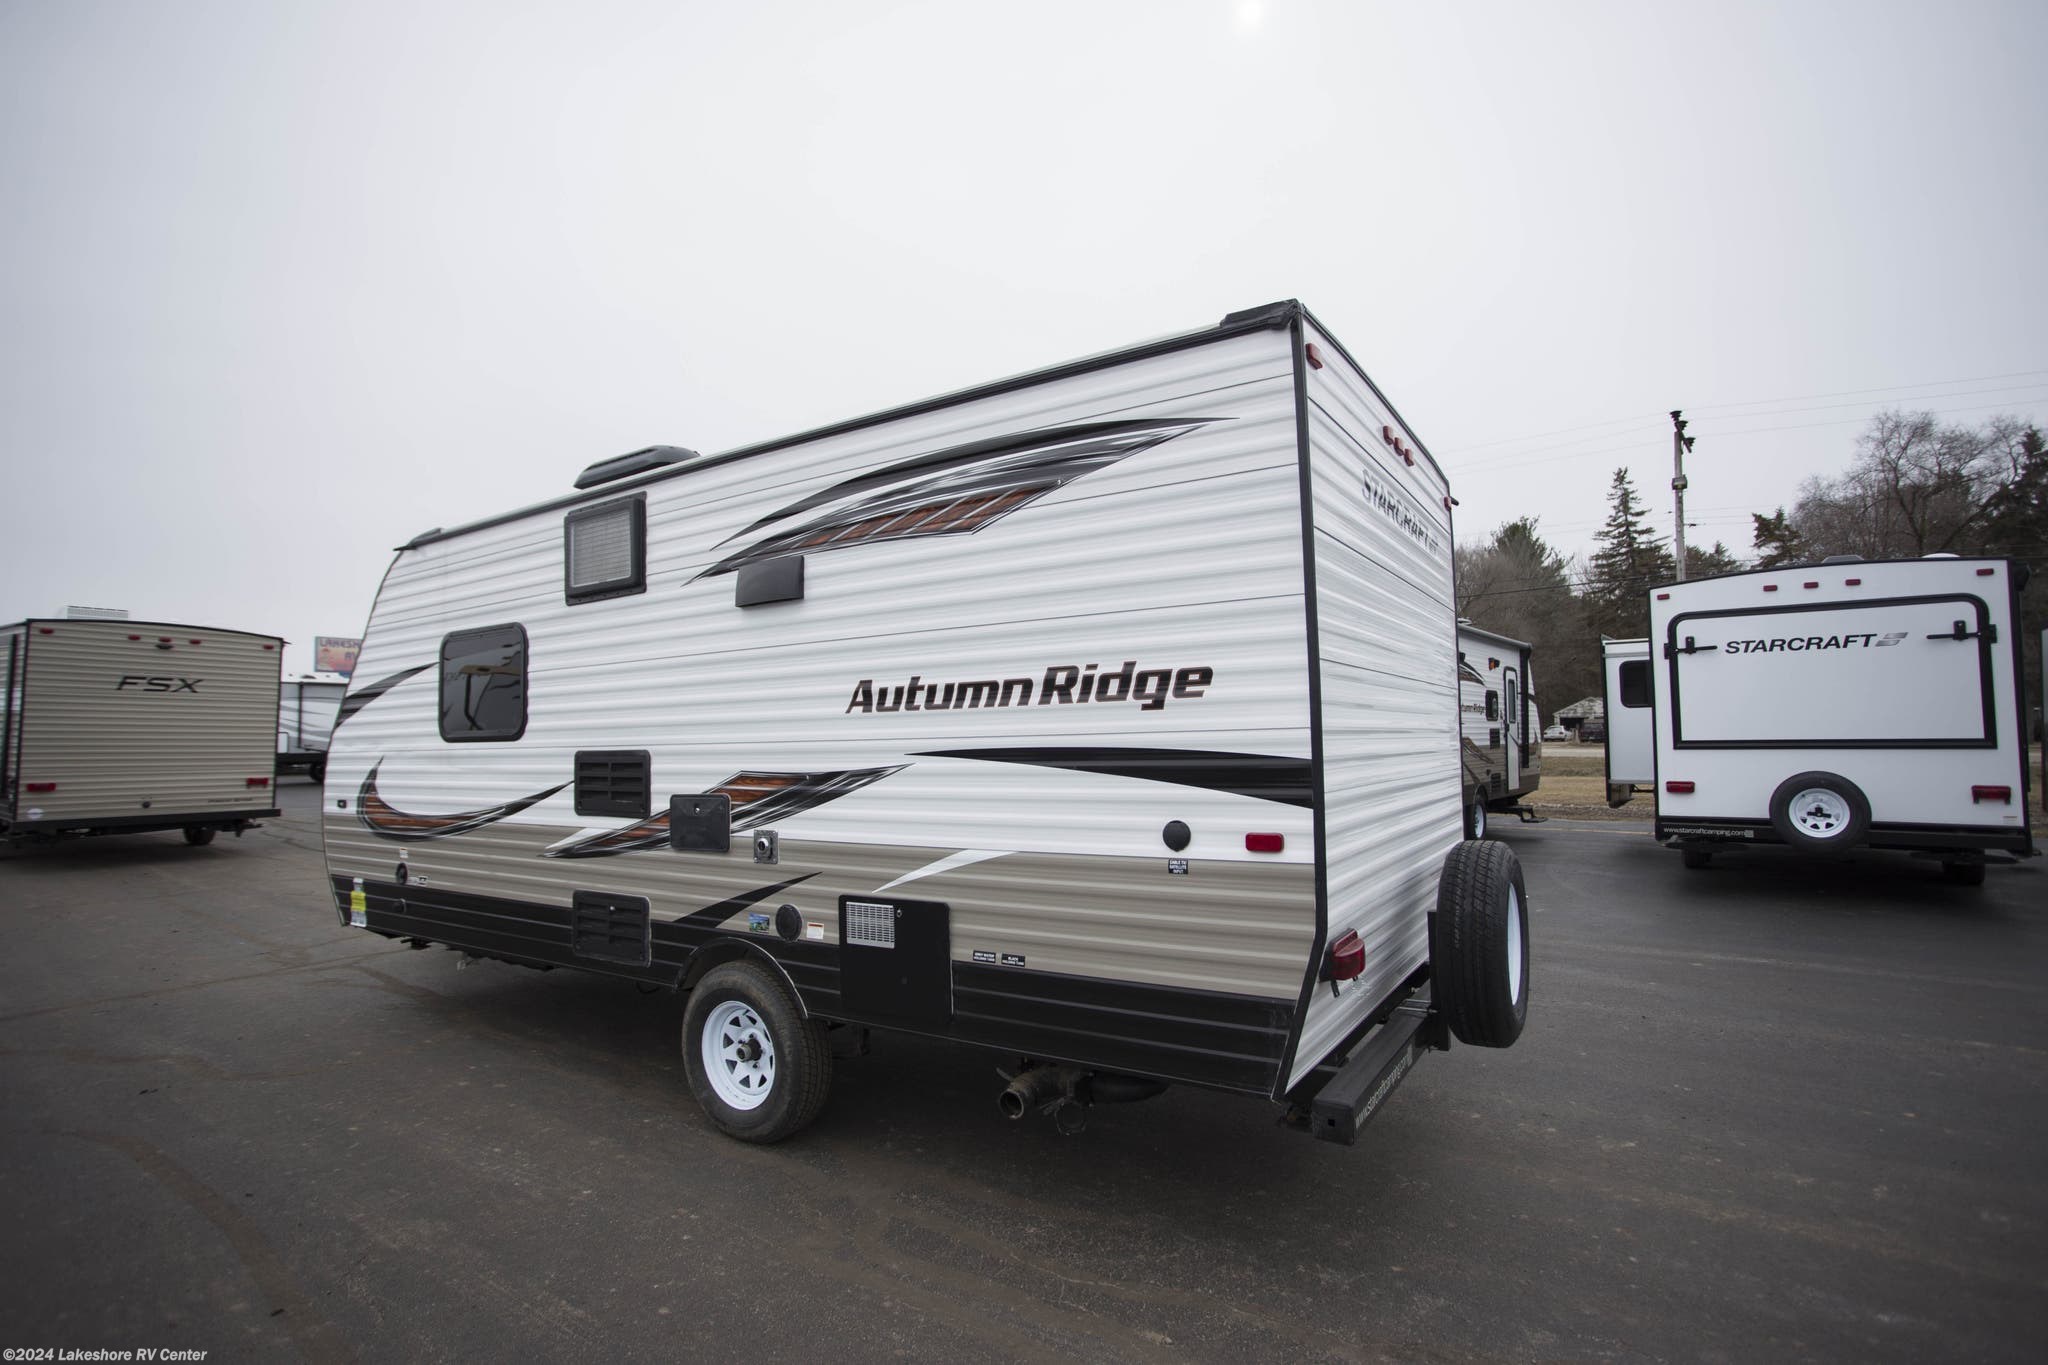 2018 Starcraft Autumn Ridge Outfitter 18QB RV for Sale in Muskegon, MI 49442 | 26840 | RVUSA.com 2018 Starcraft Autumn Ridge Outfitter 18qb Specs